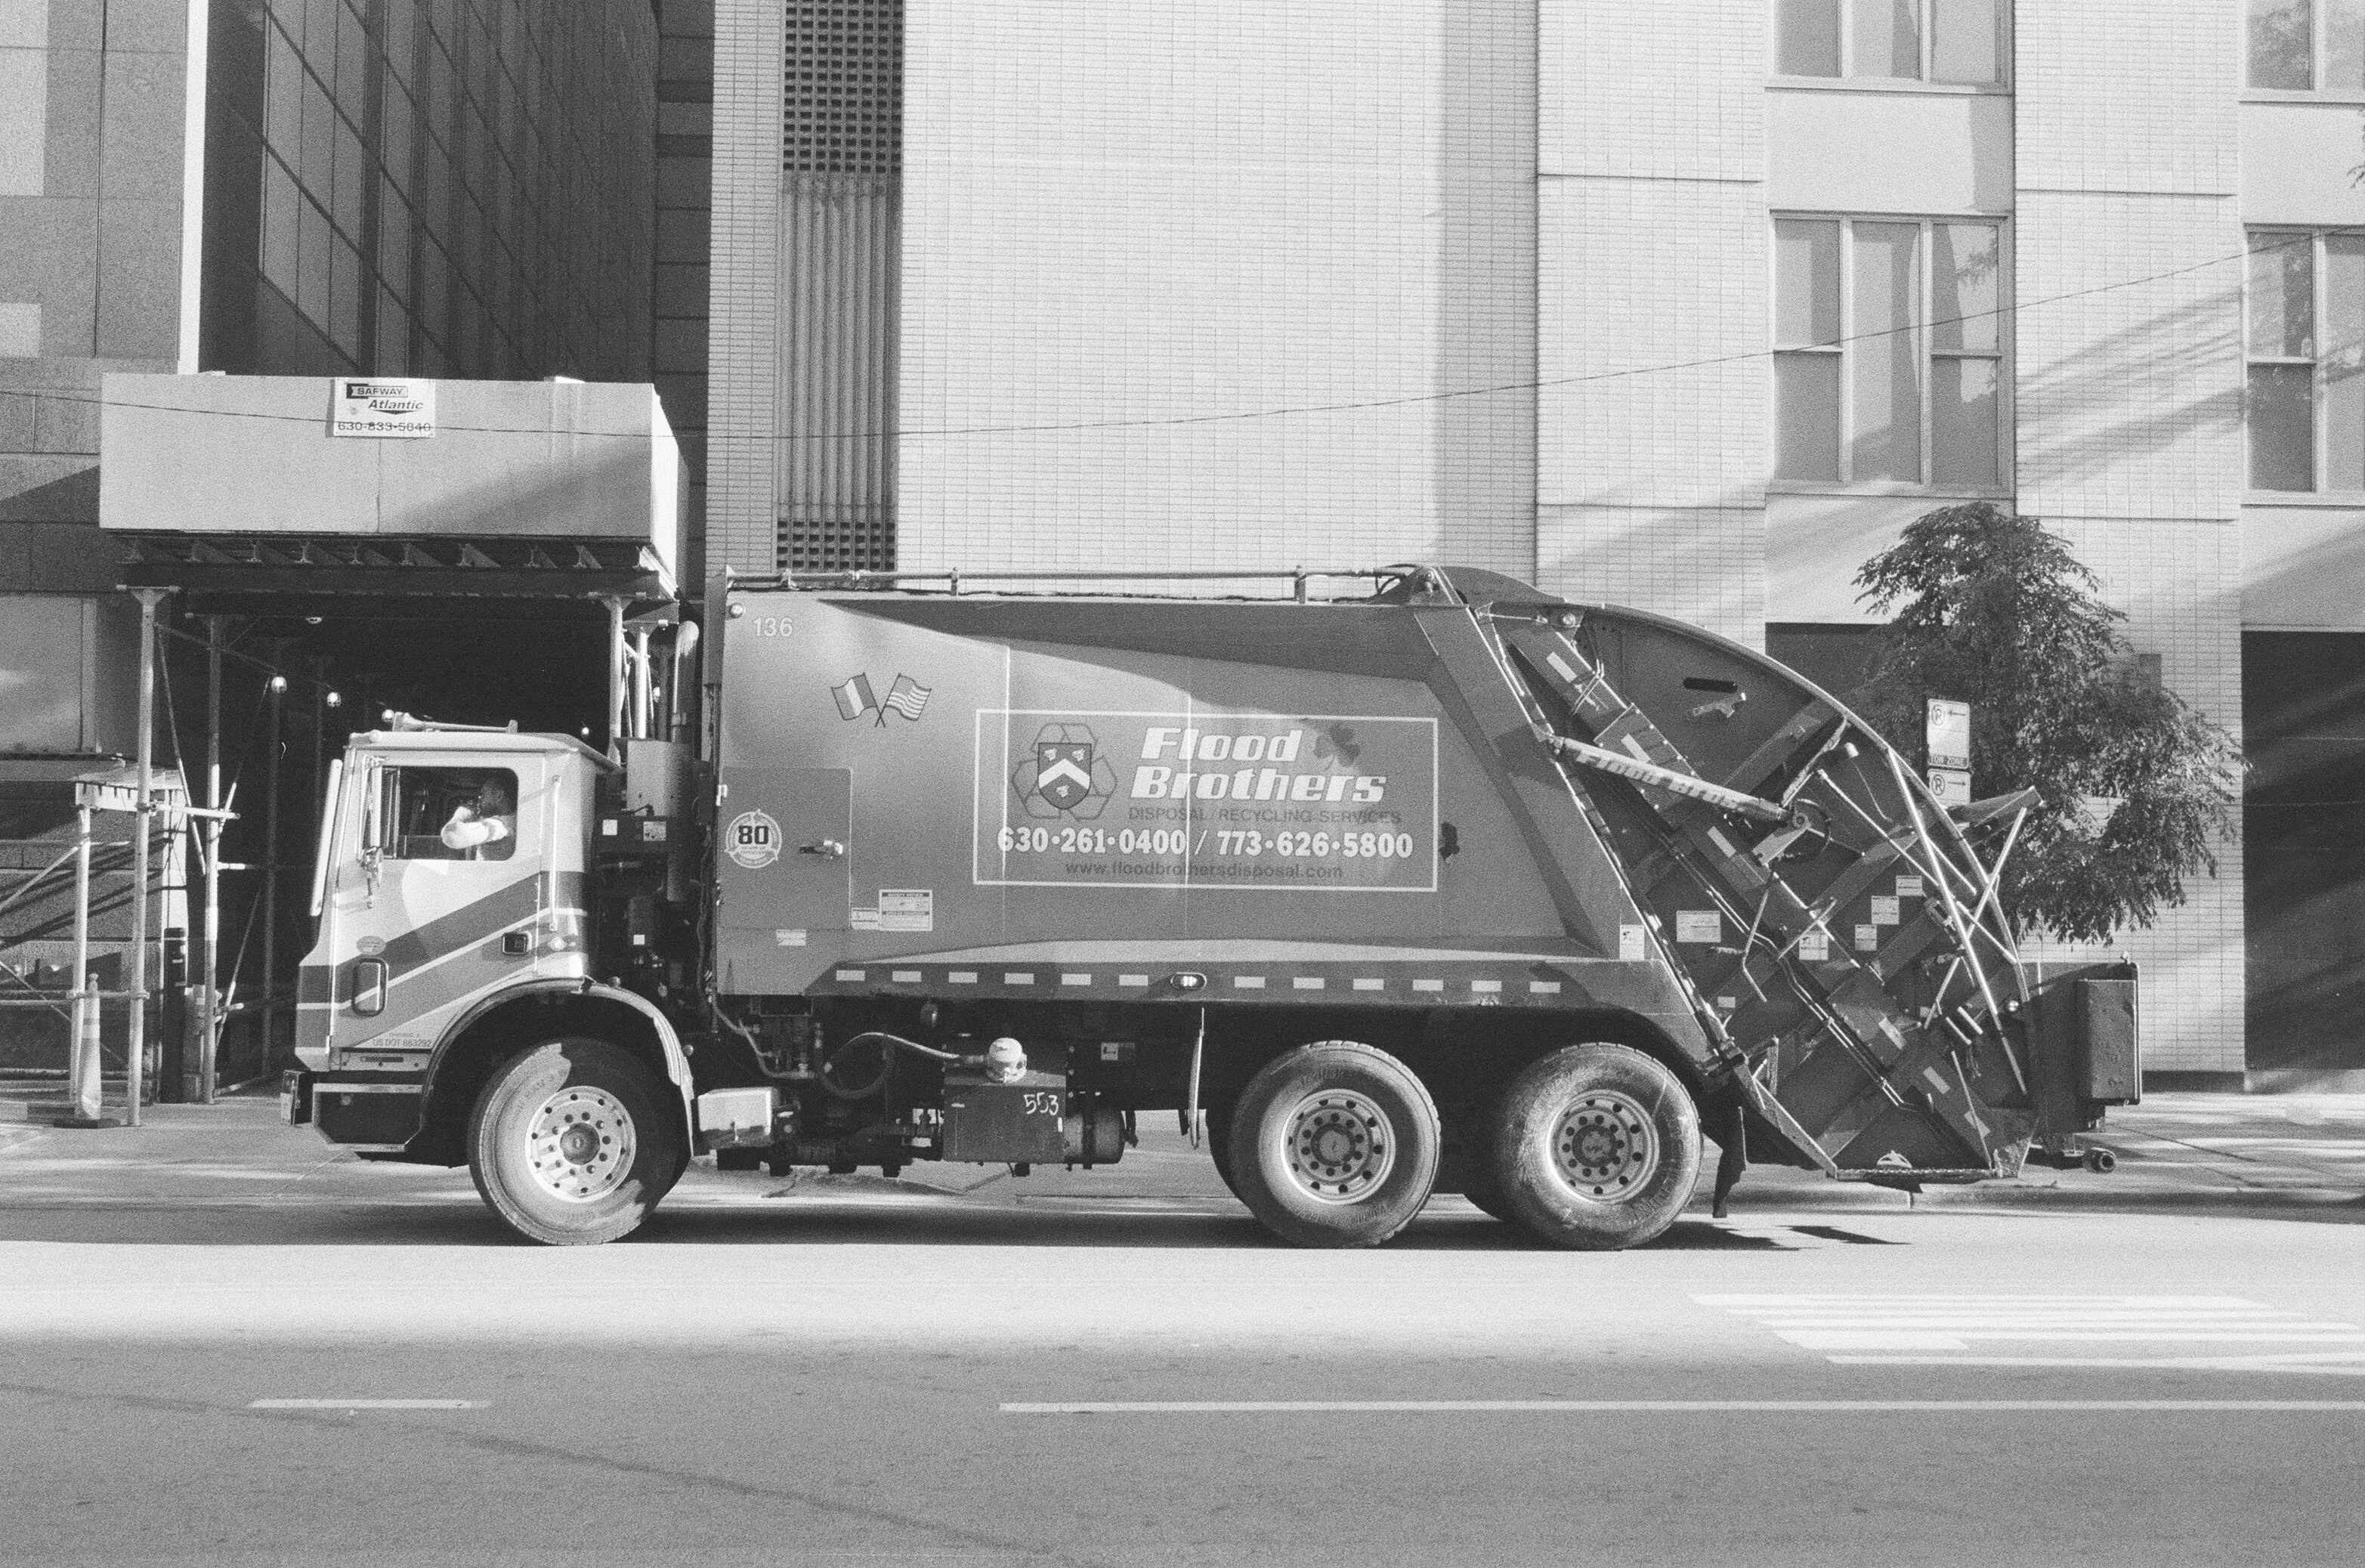 A black and white profile shot of a garbage truck